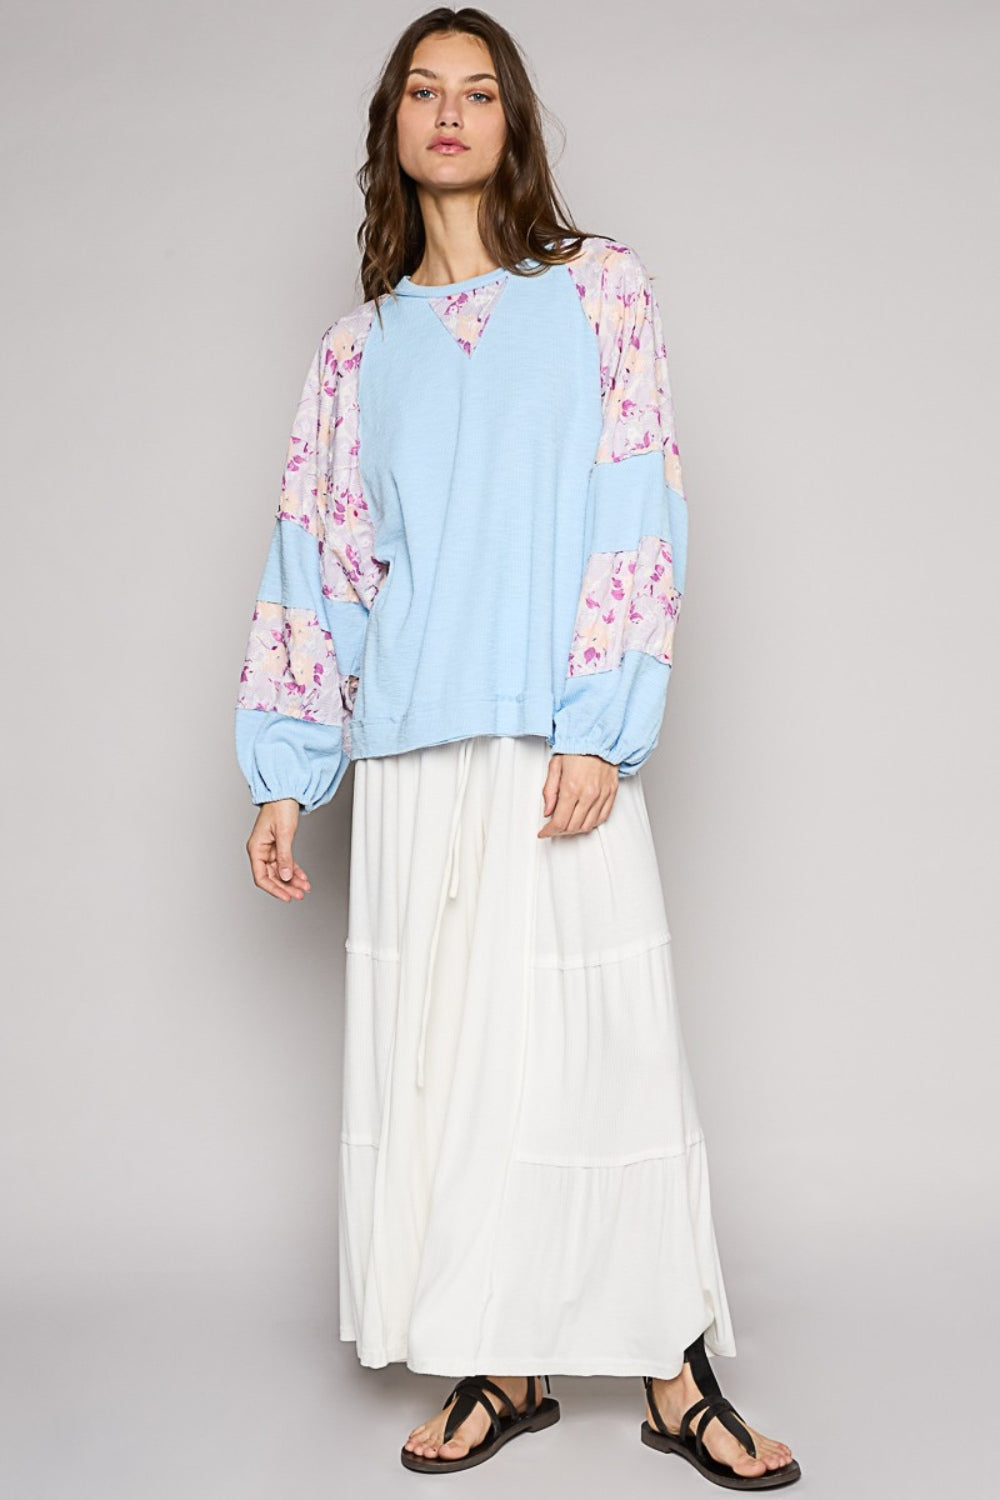 Balloon Sleeve Floral Top in Sky Blue Multi